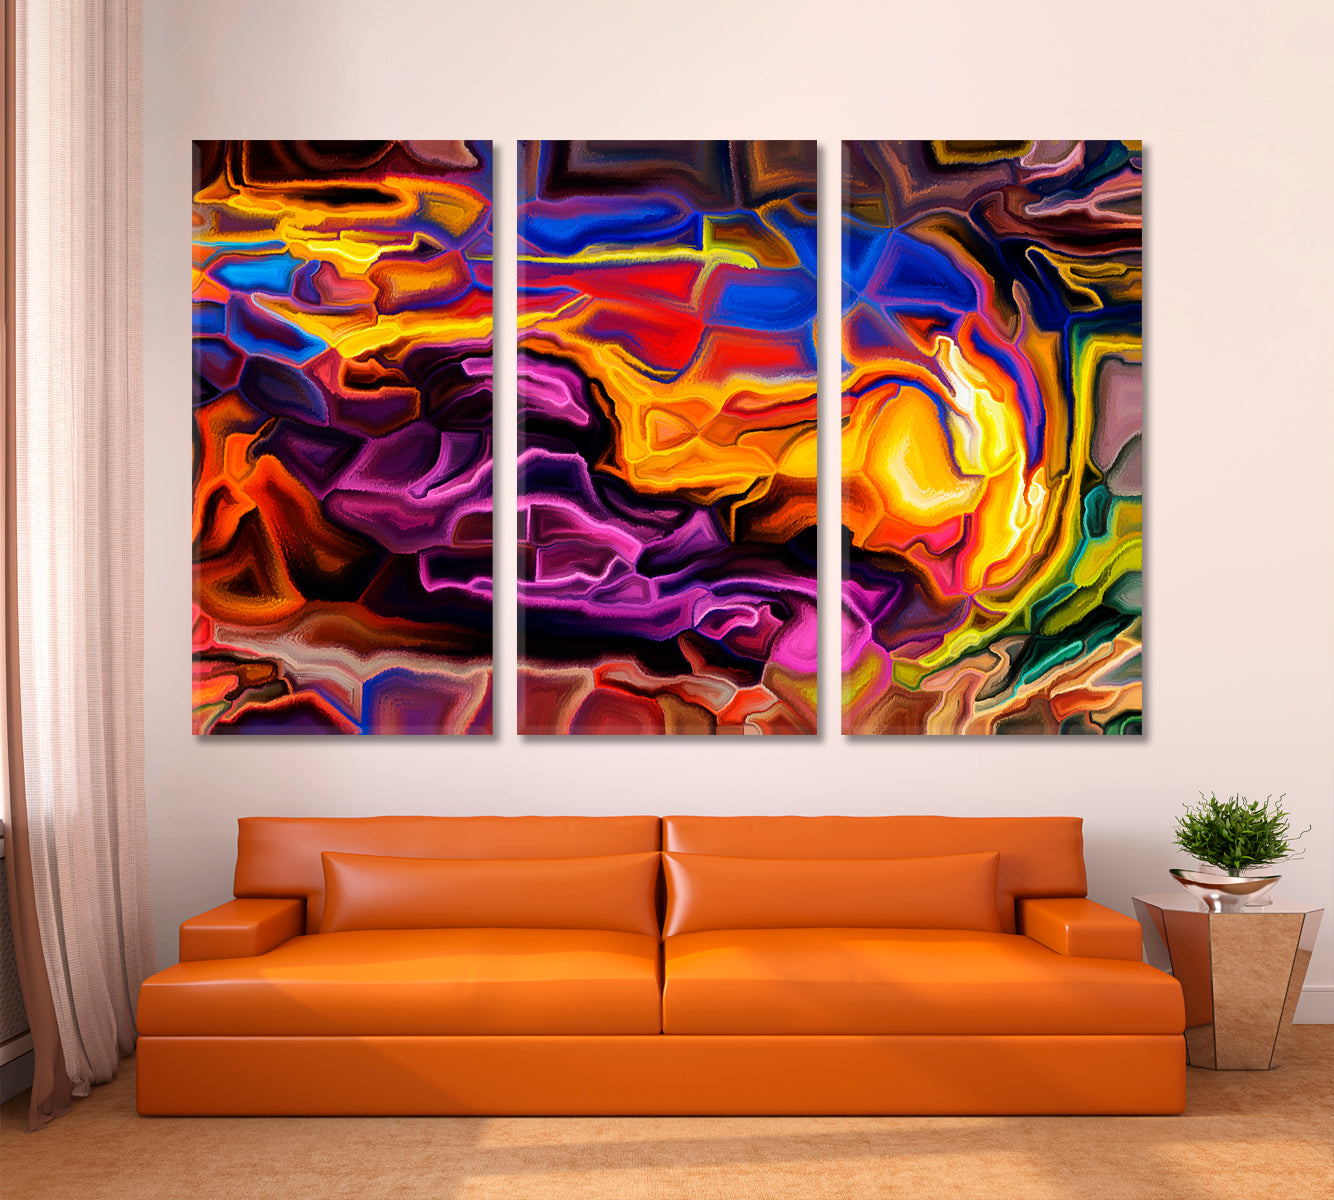 COLOR FLOW Abstract Colorful Contemporary Art Contemporary Art Artesty 3 panels 36" x 24" 